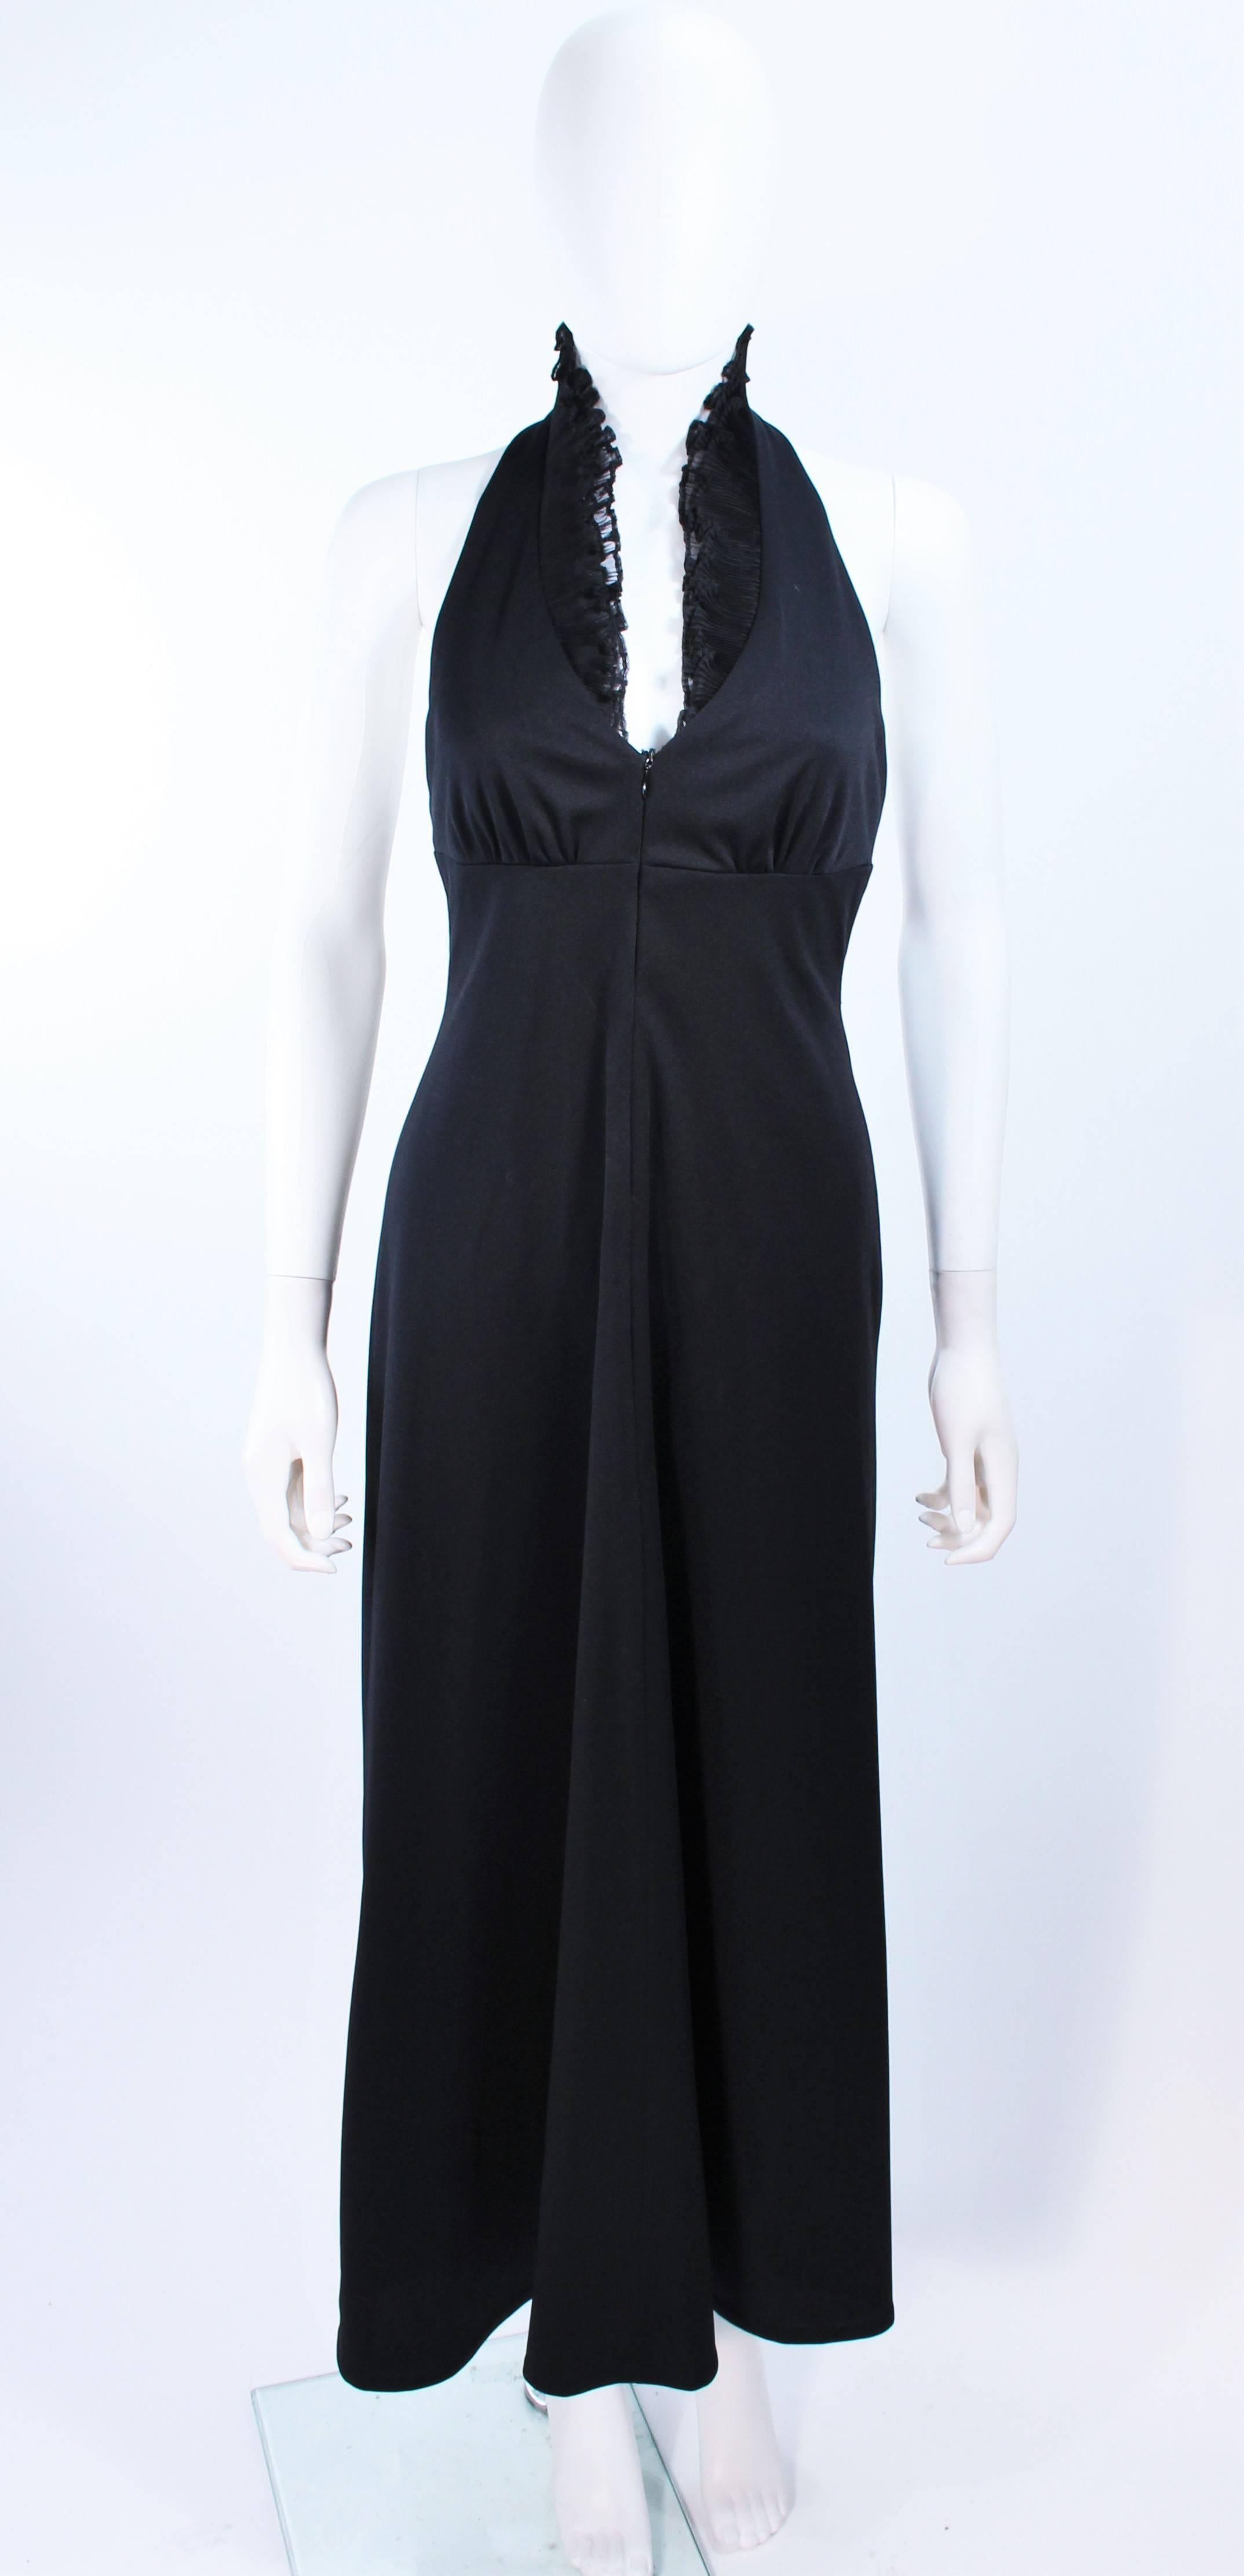 This gown is composed of a black jersey and features a ruffle neckline detail. There is a center back zipper closure. In excellent vintage condition.

**Please cross-reference measurements for personal accuracy. Size in description box is an